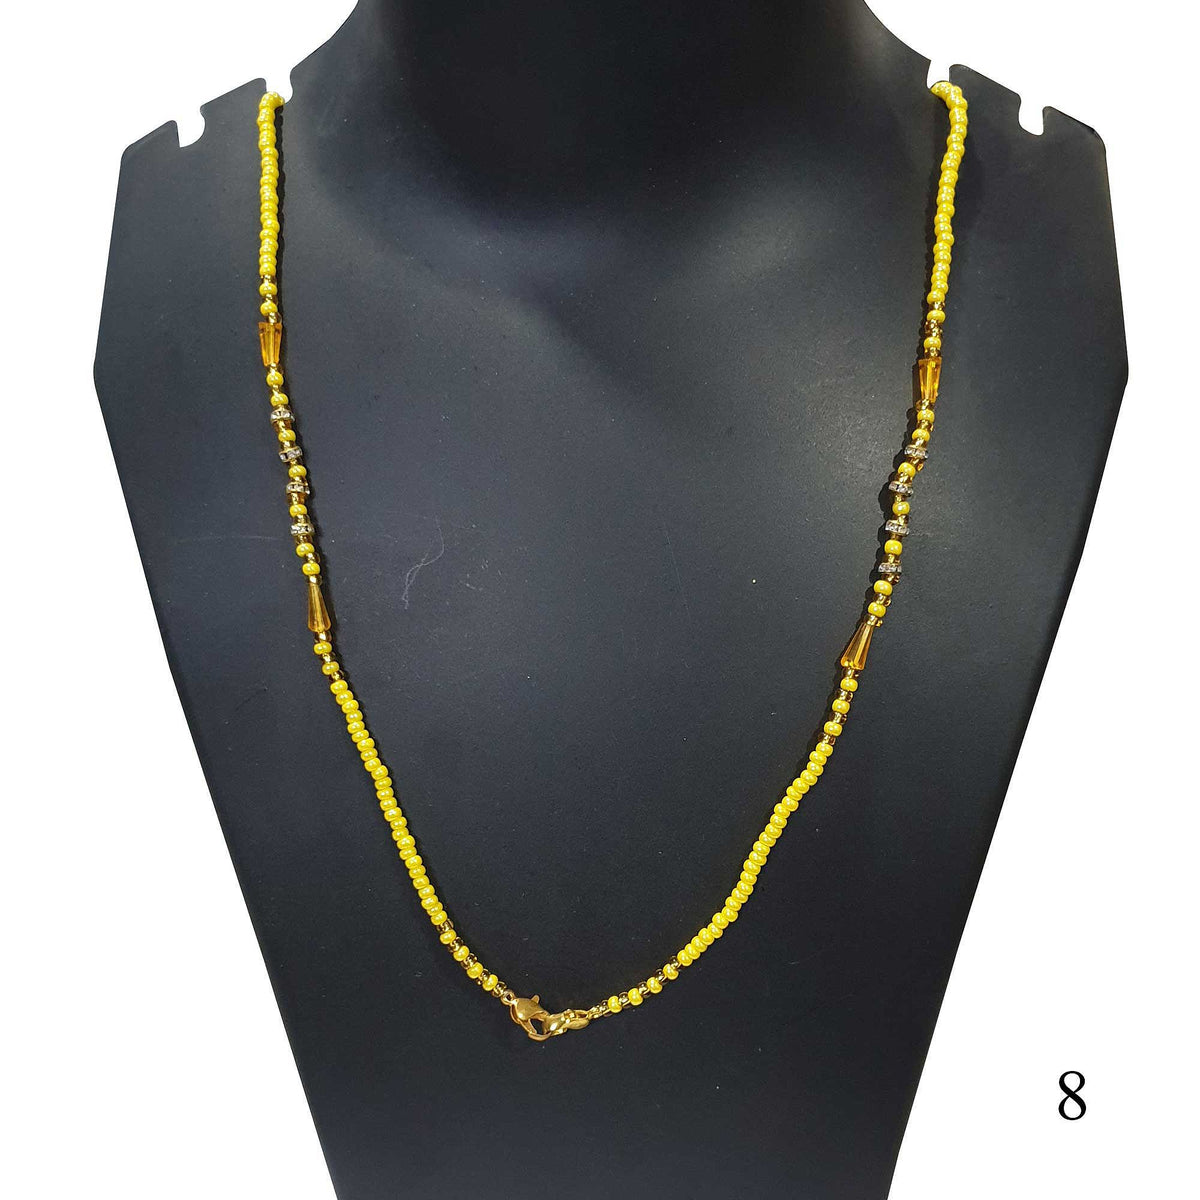 Preciosa Czeck Beads Chain 24 Inches Long handmade Beaded Just add a Pendant to Make necklace Instantly